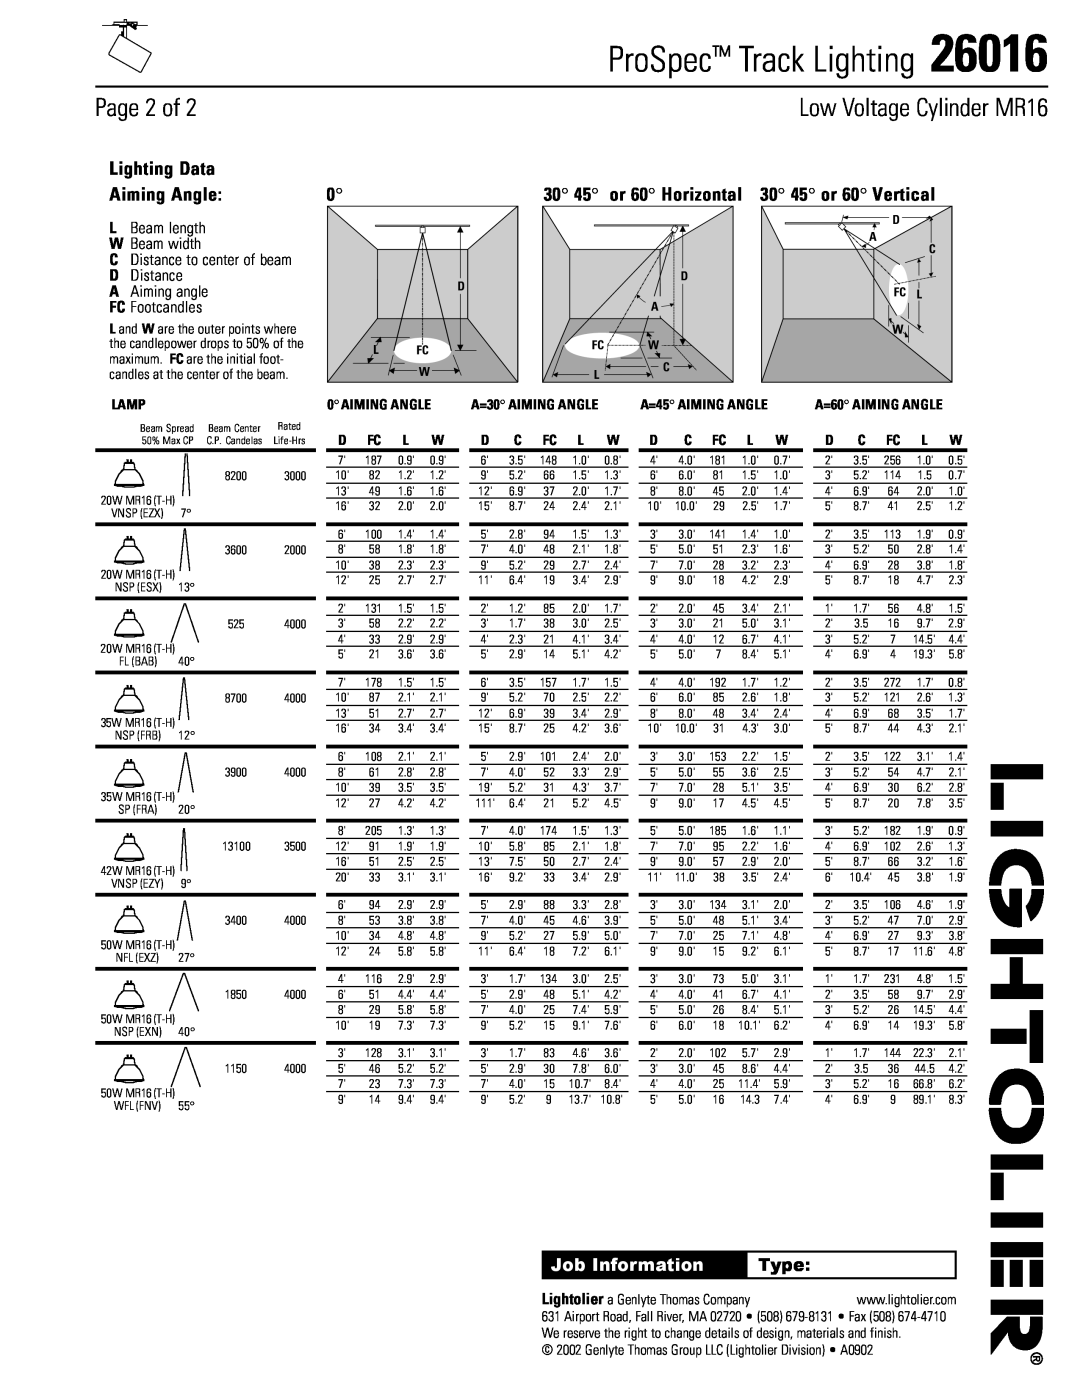 Lightolier 26016 Page 2 of, 30 45 or 60 Horizontal 30 45 or 60 Vertical, Lamp, D Fc L W, D C Fc L W, Job Information, Type 